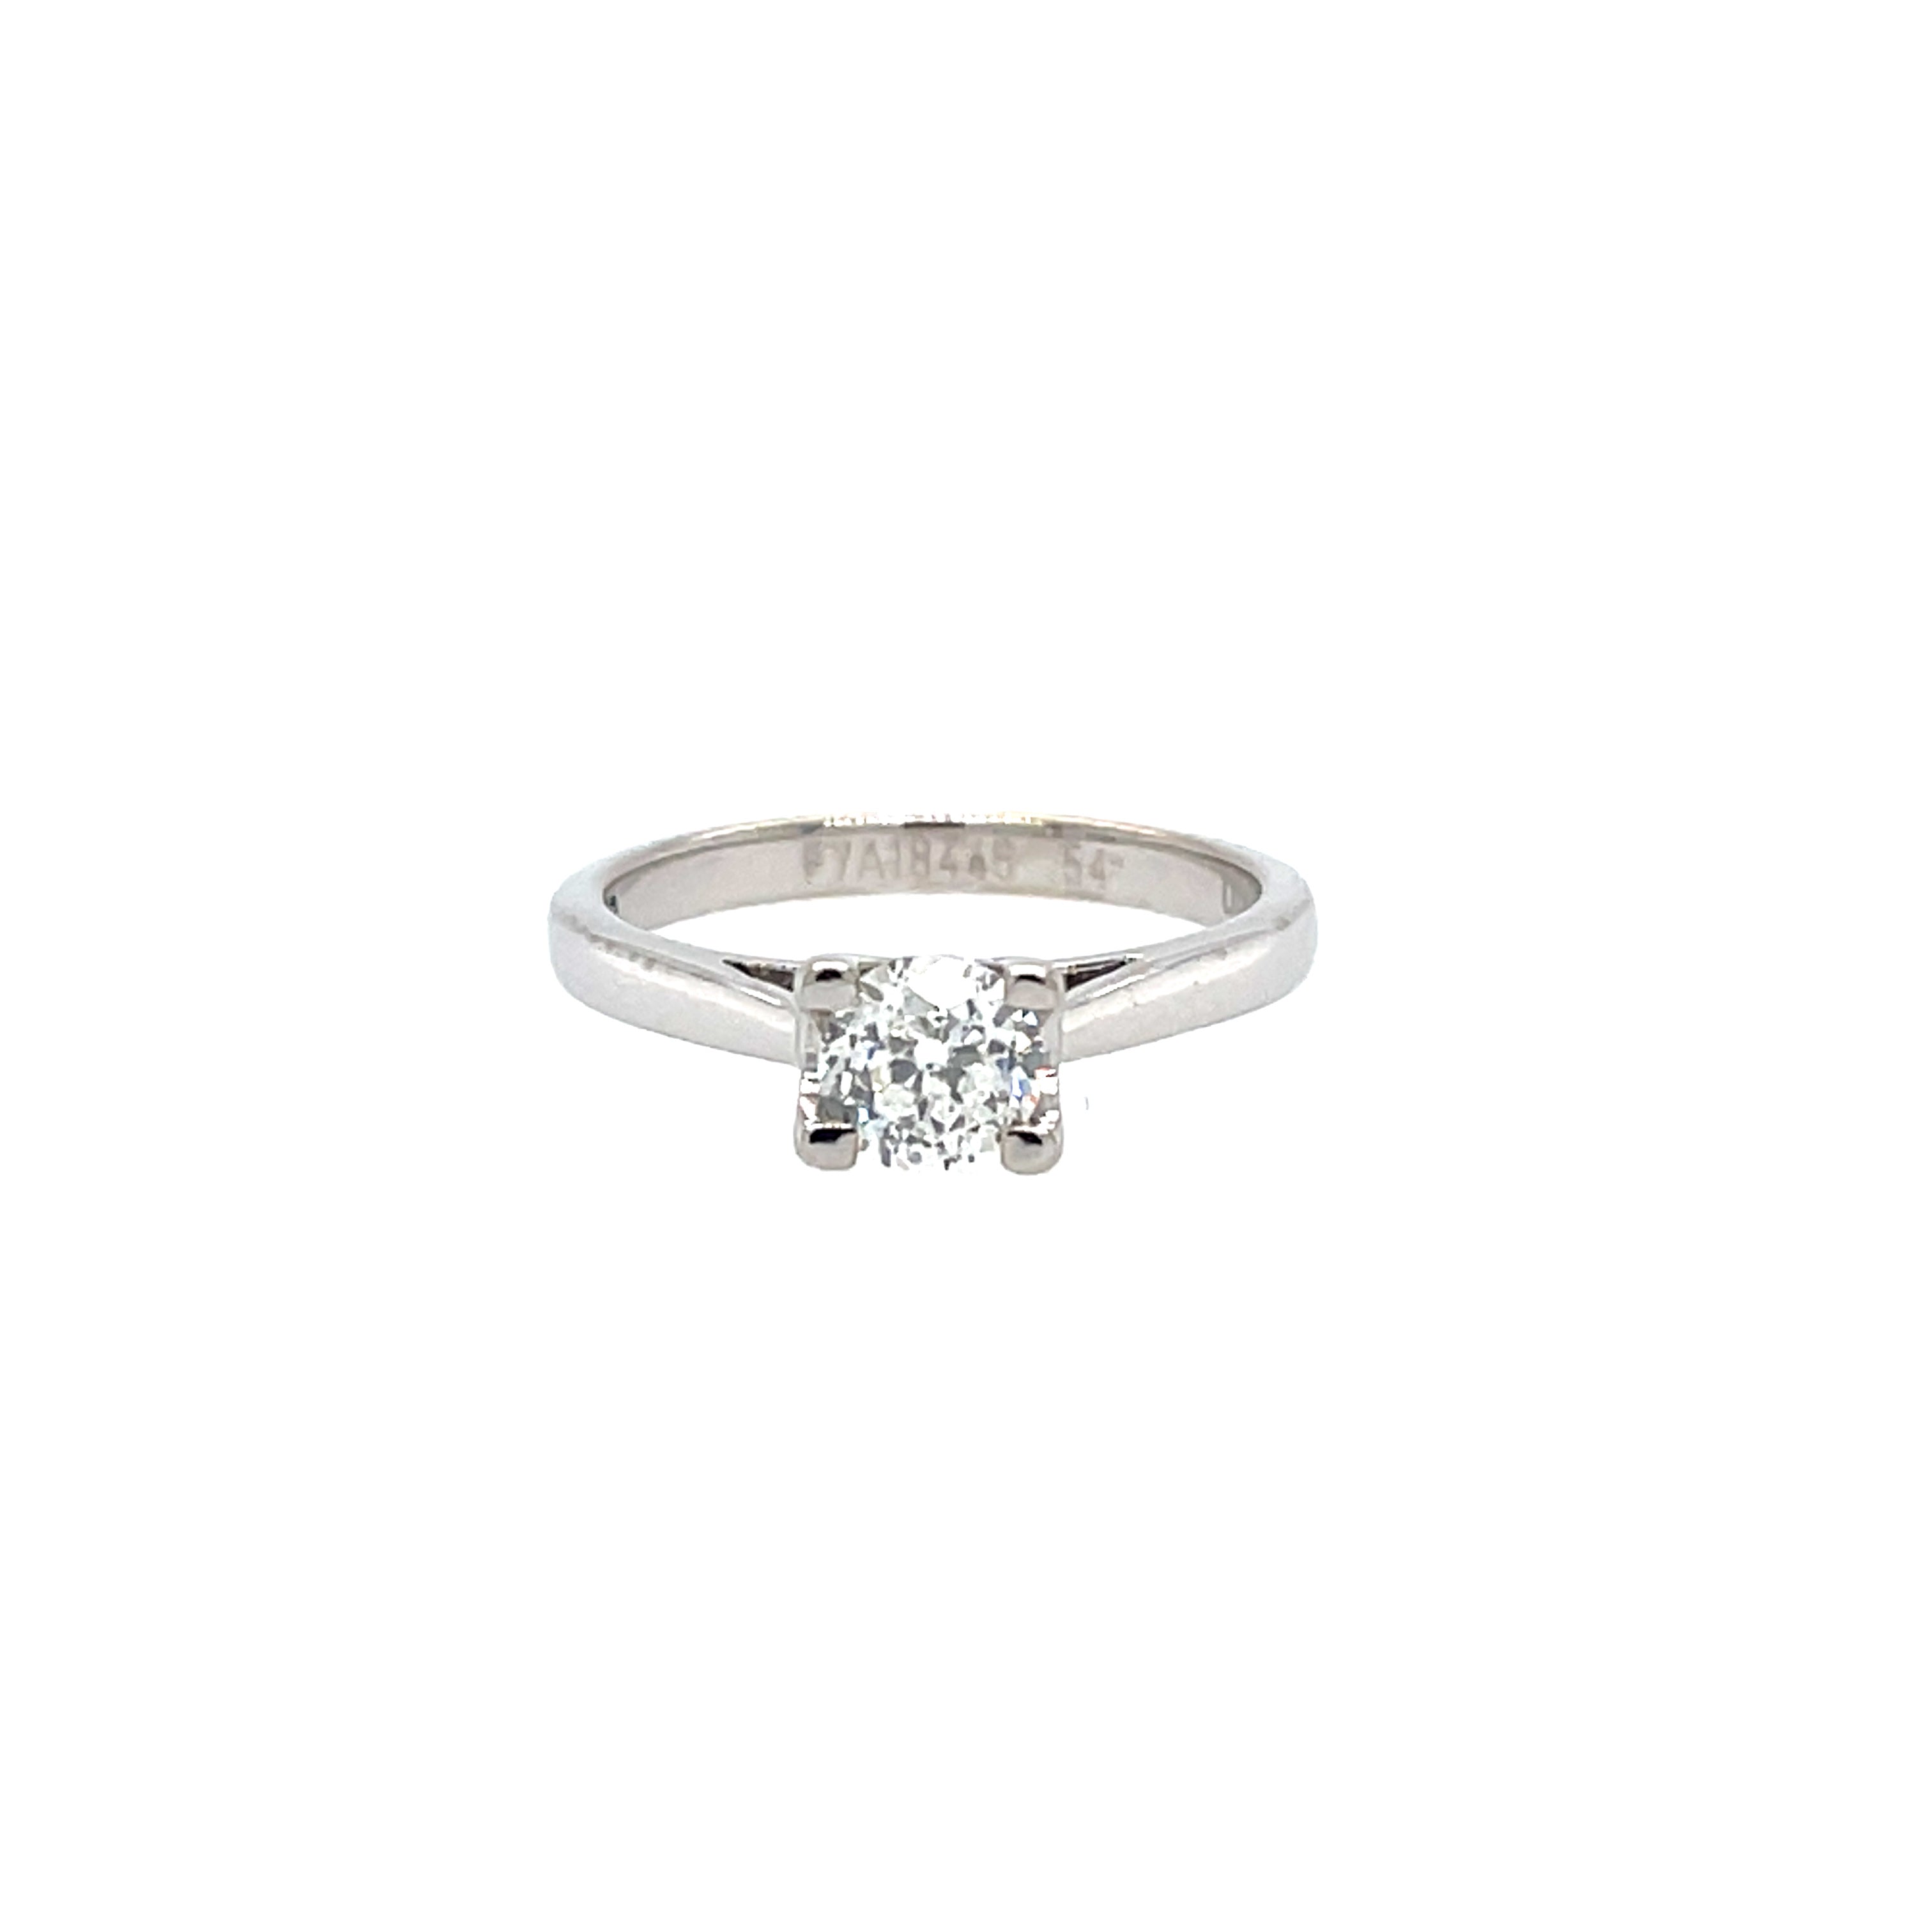 18ct White Gold 0.54ct Round Brilliant Cut Diamond Solitaire Engagement Ring Certified G I1 SOLD